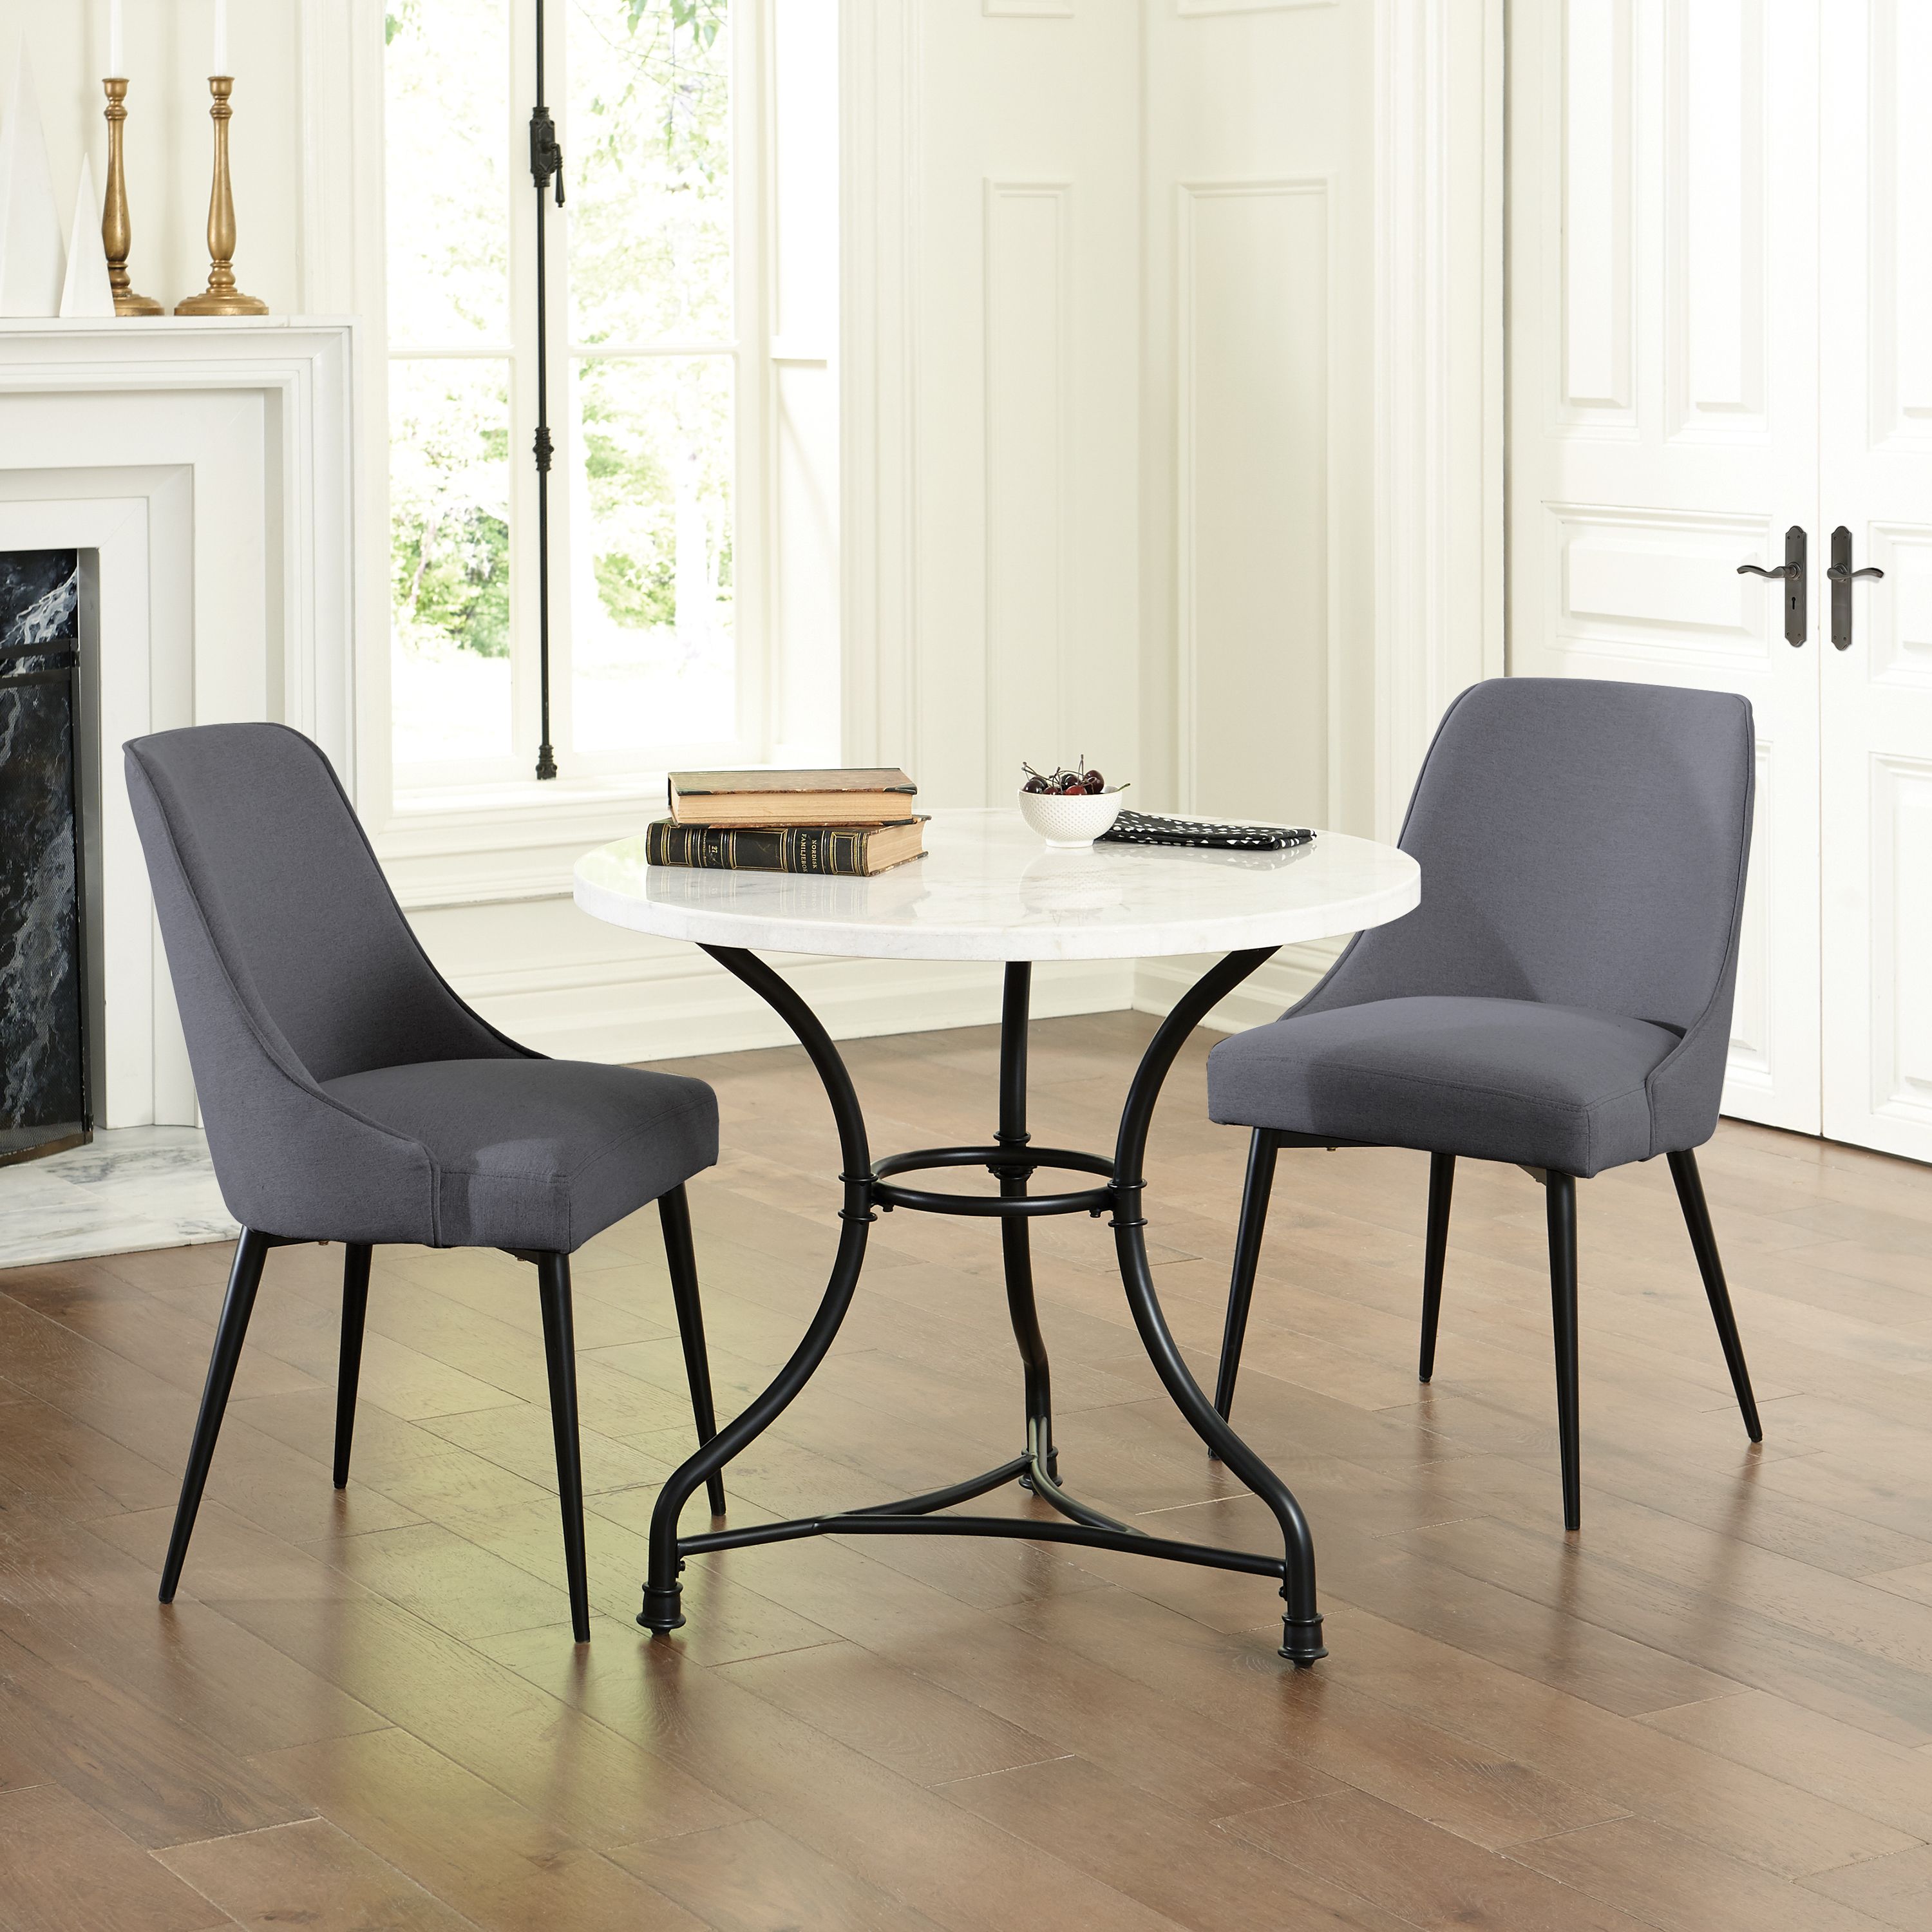 Moderne 3 Piece Round Dining Set with Charcoal Chairs by Chateau Lyon - image 1 of 10